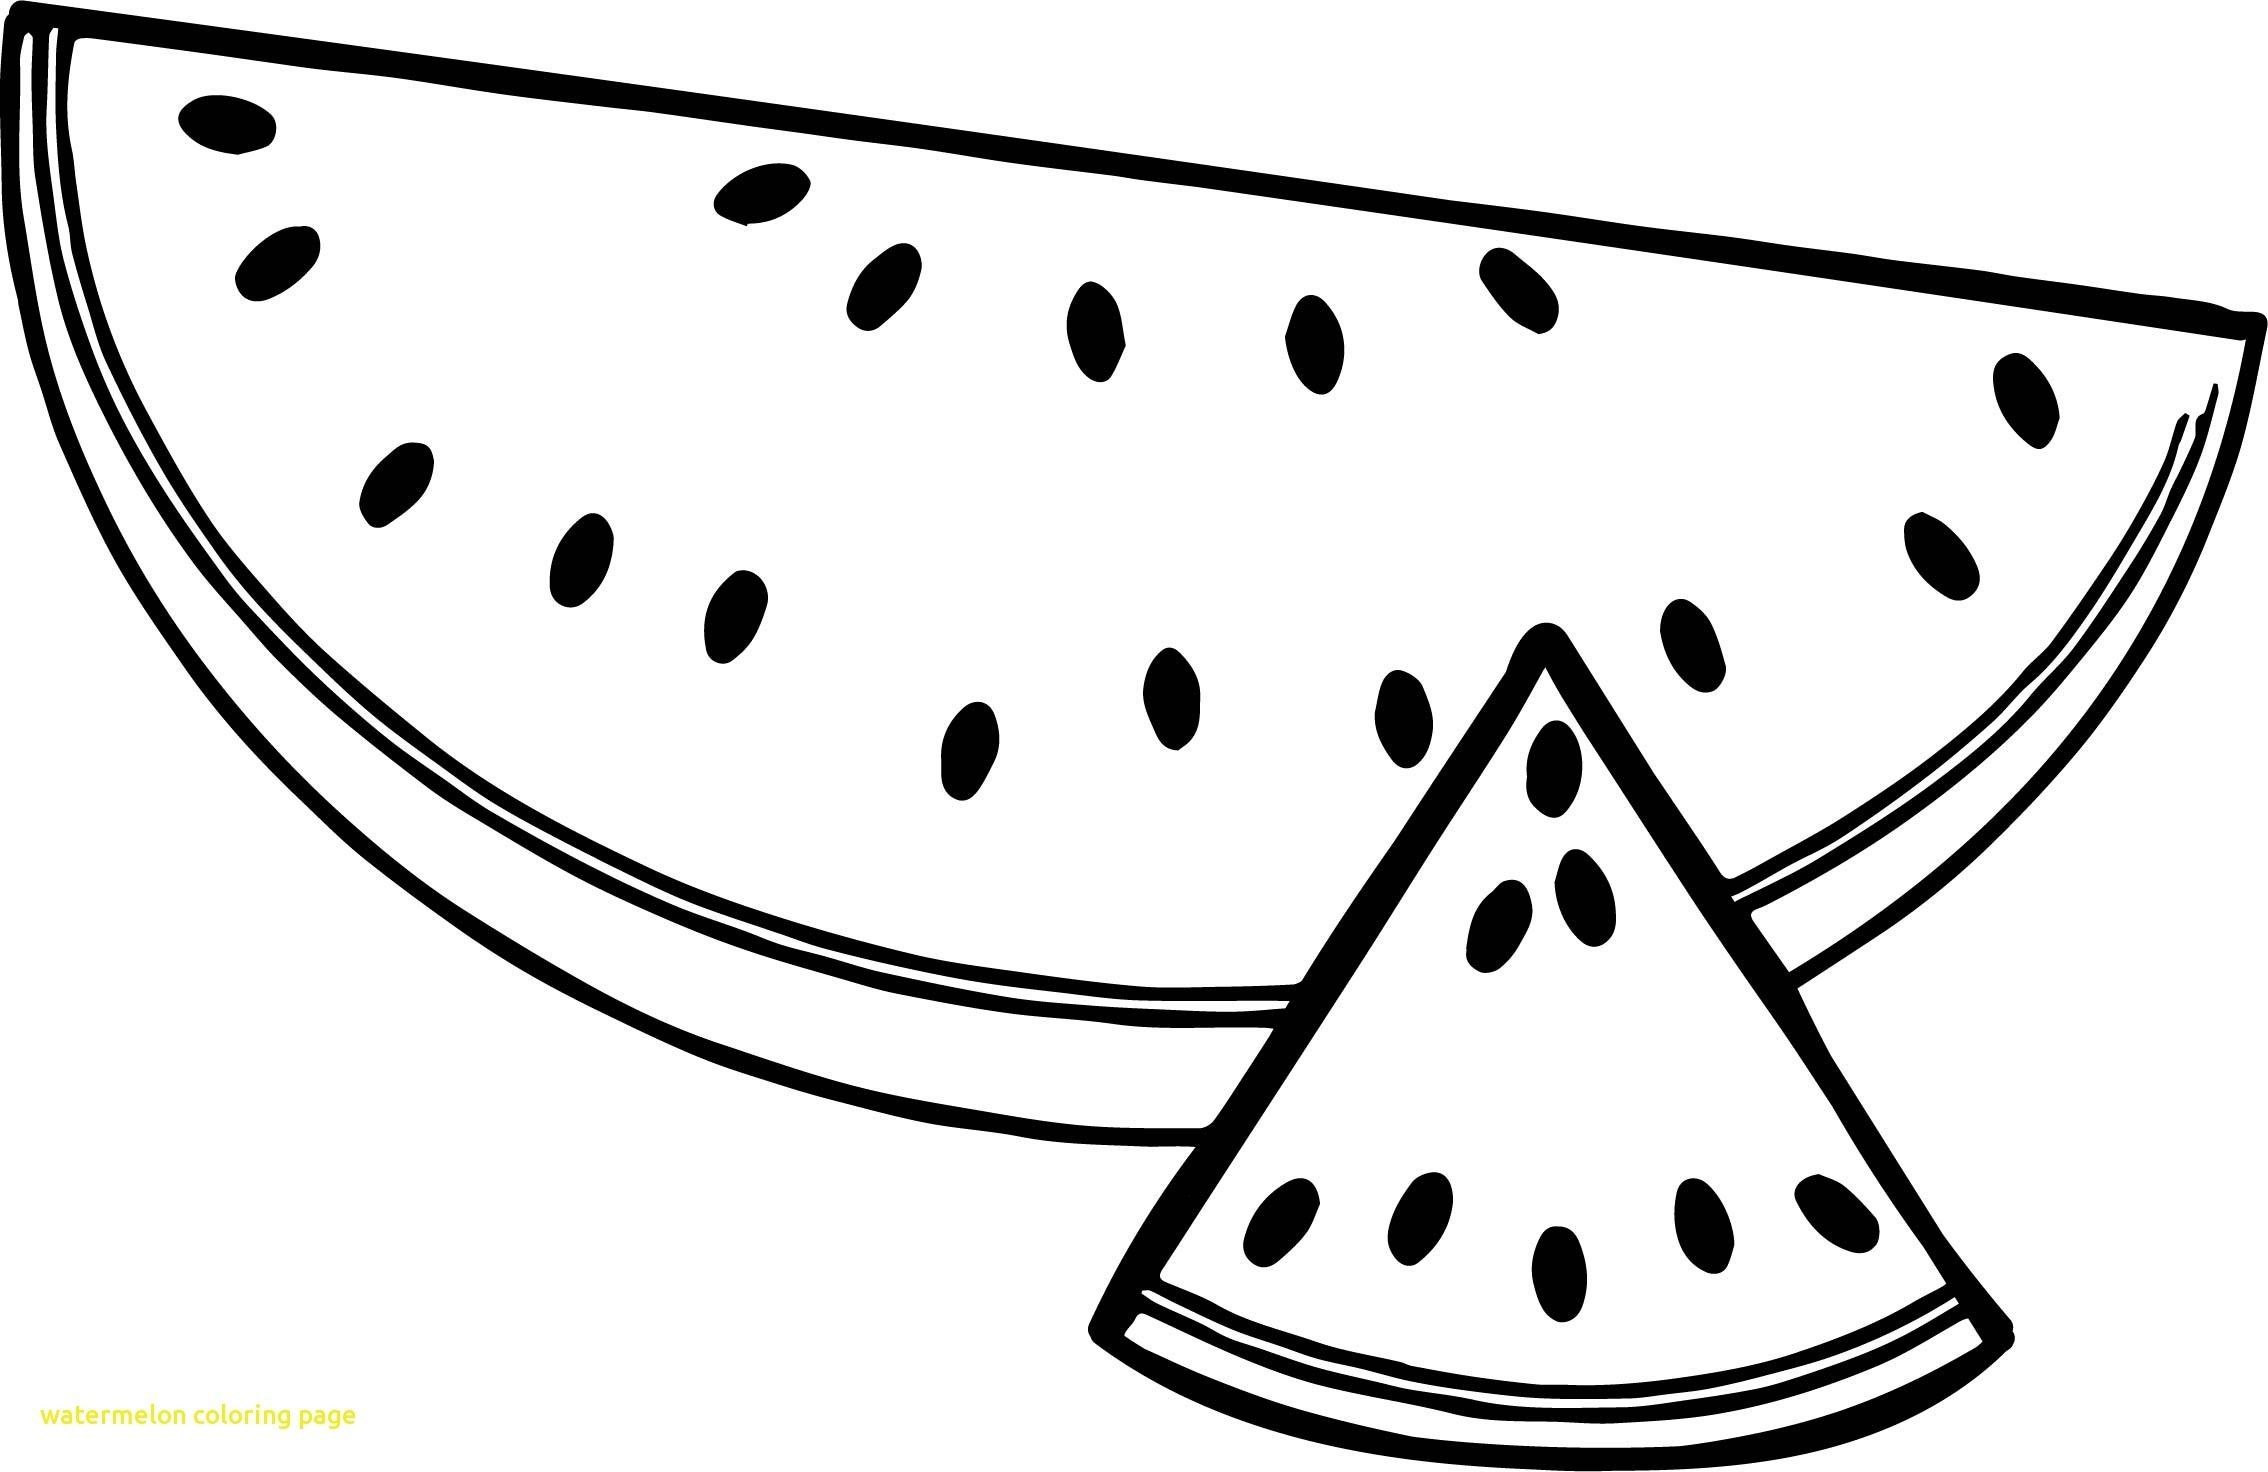 coloring-page-watermelon-coloring-page-watermelon-coloring-page